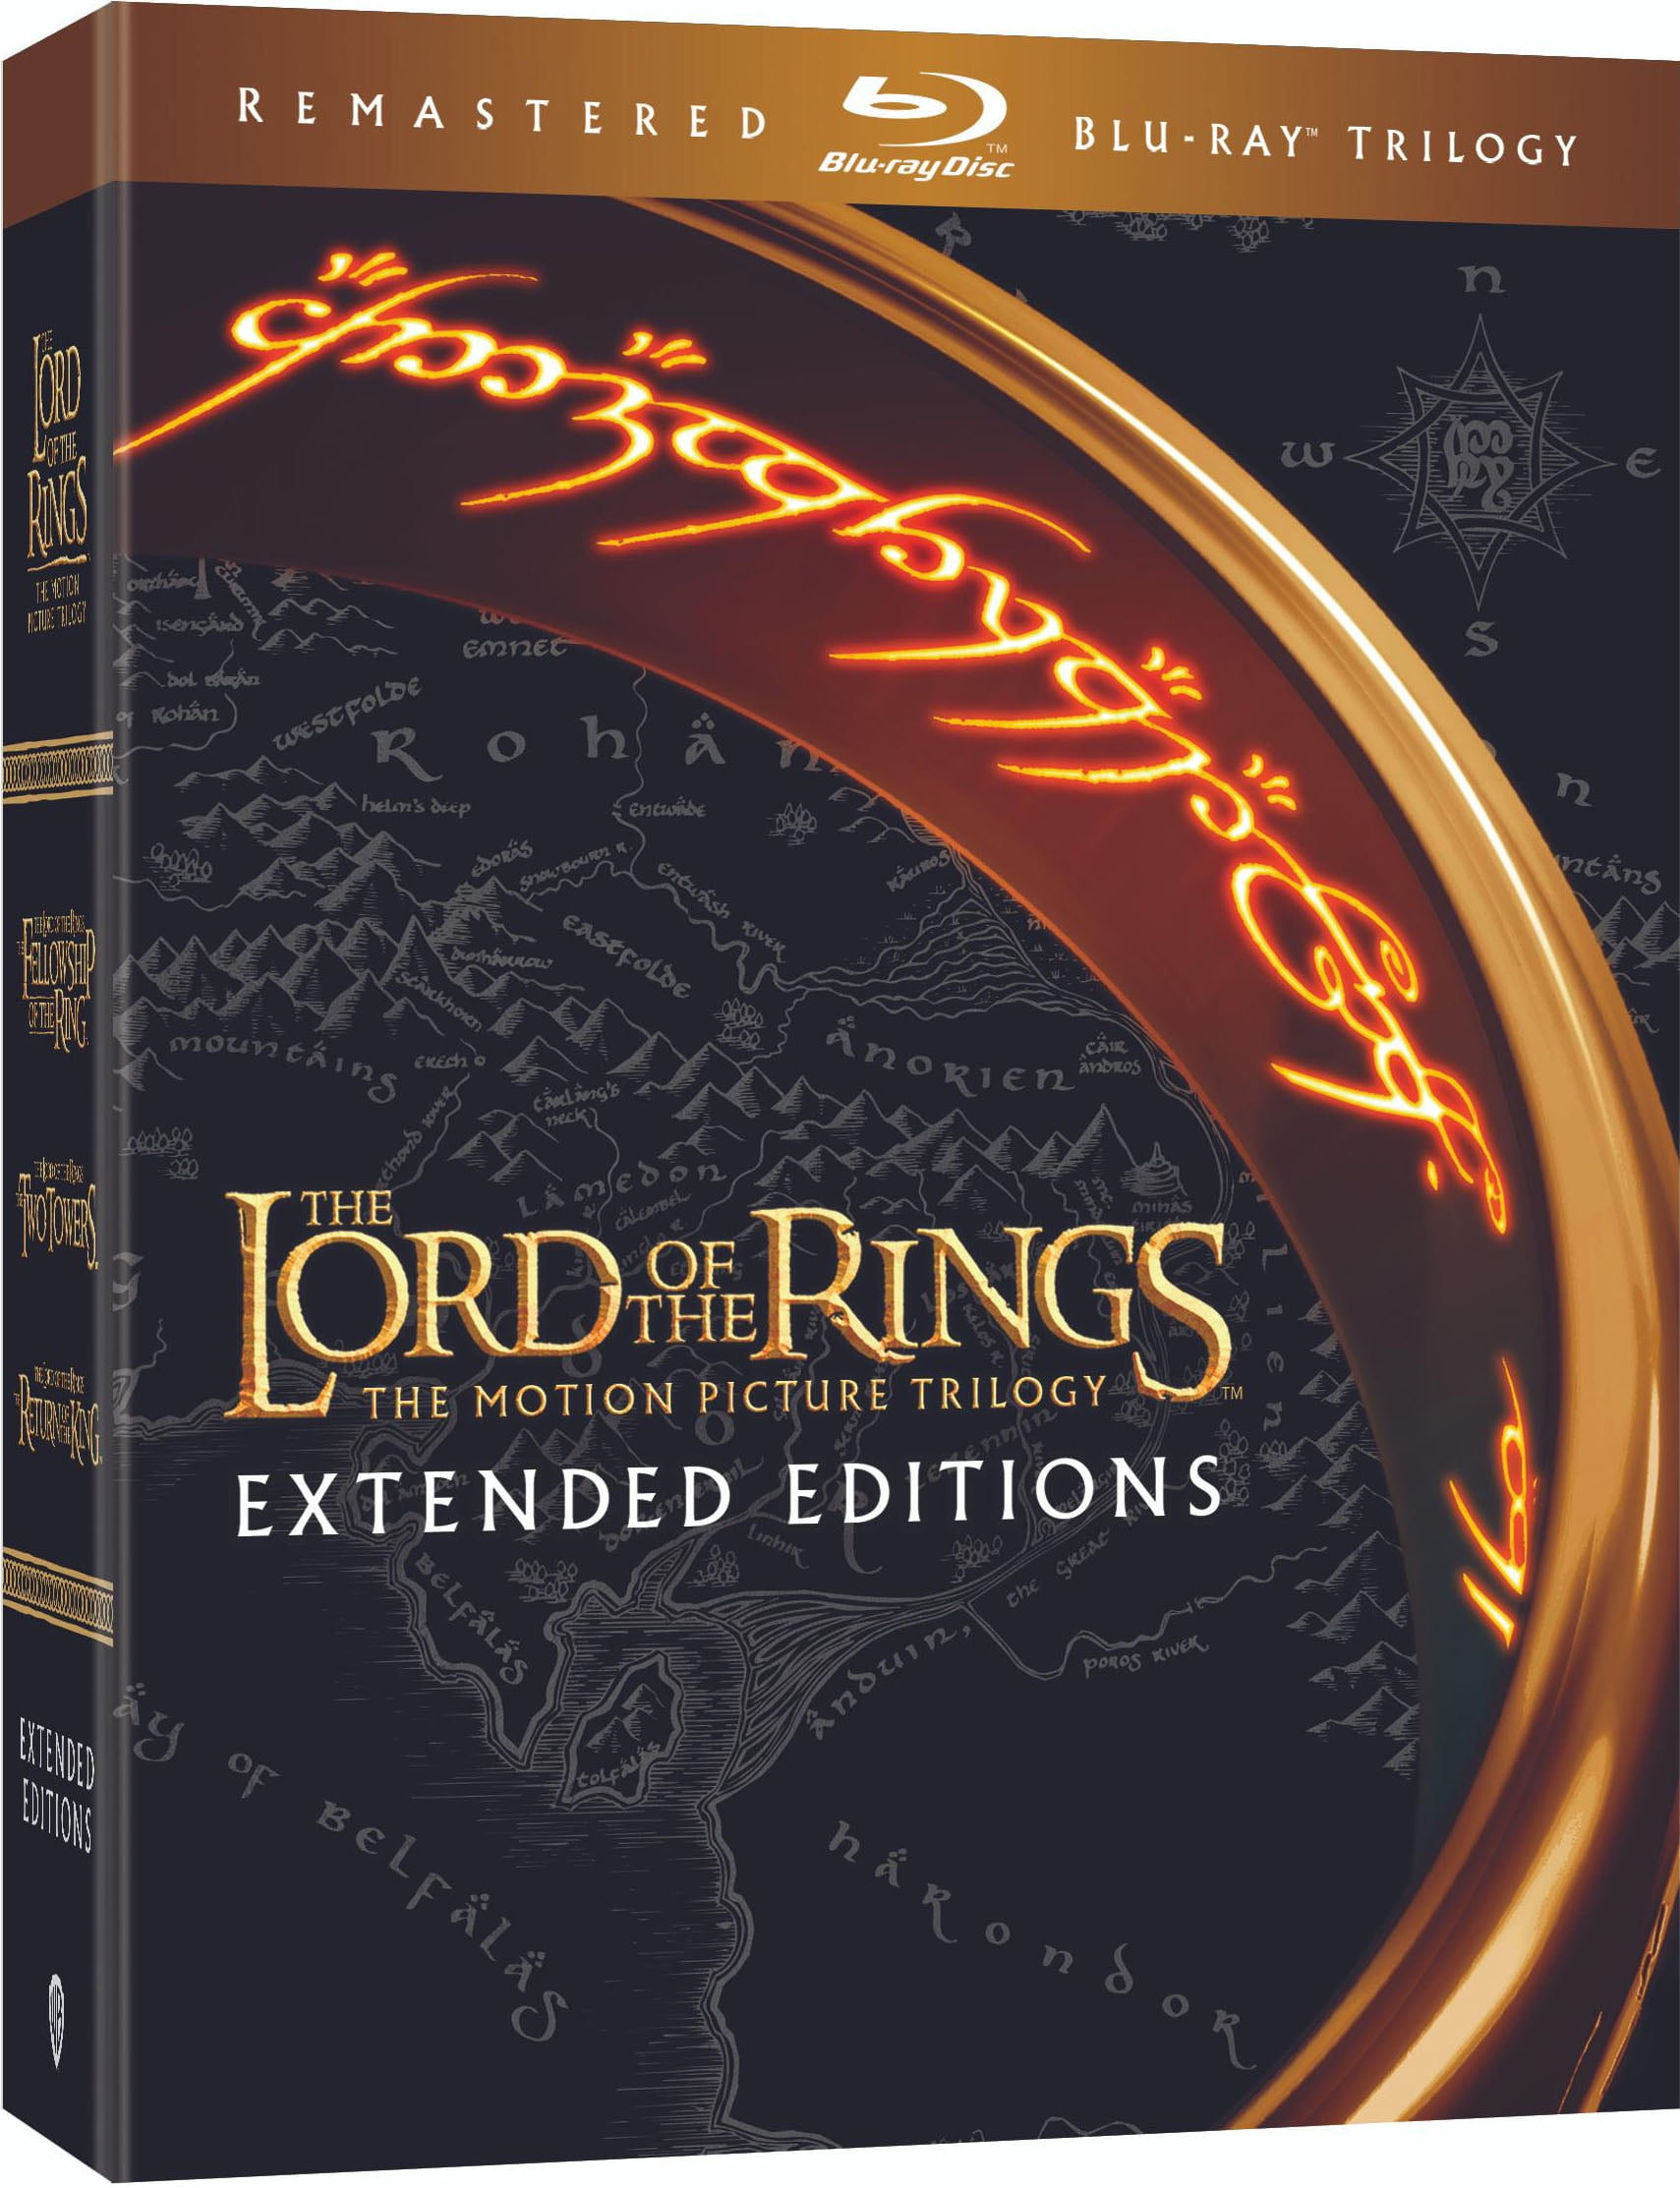 bodem Arthur onenigheid The Lord of the Rings The Motion Picture Trilogy (Extended Editions)  (Remastered Blu-ray) - Walmart.com